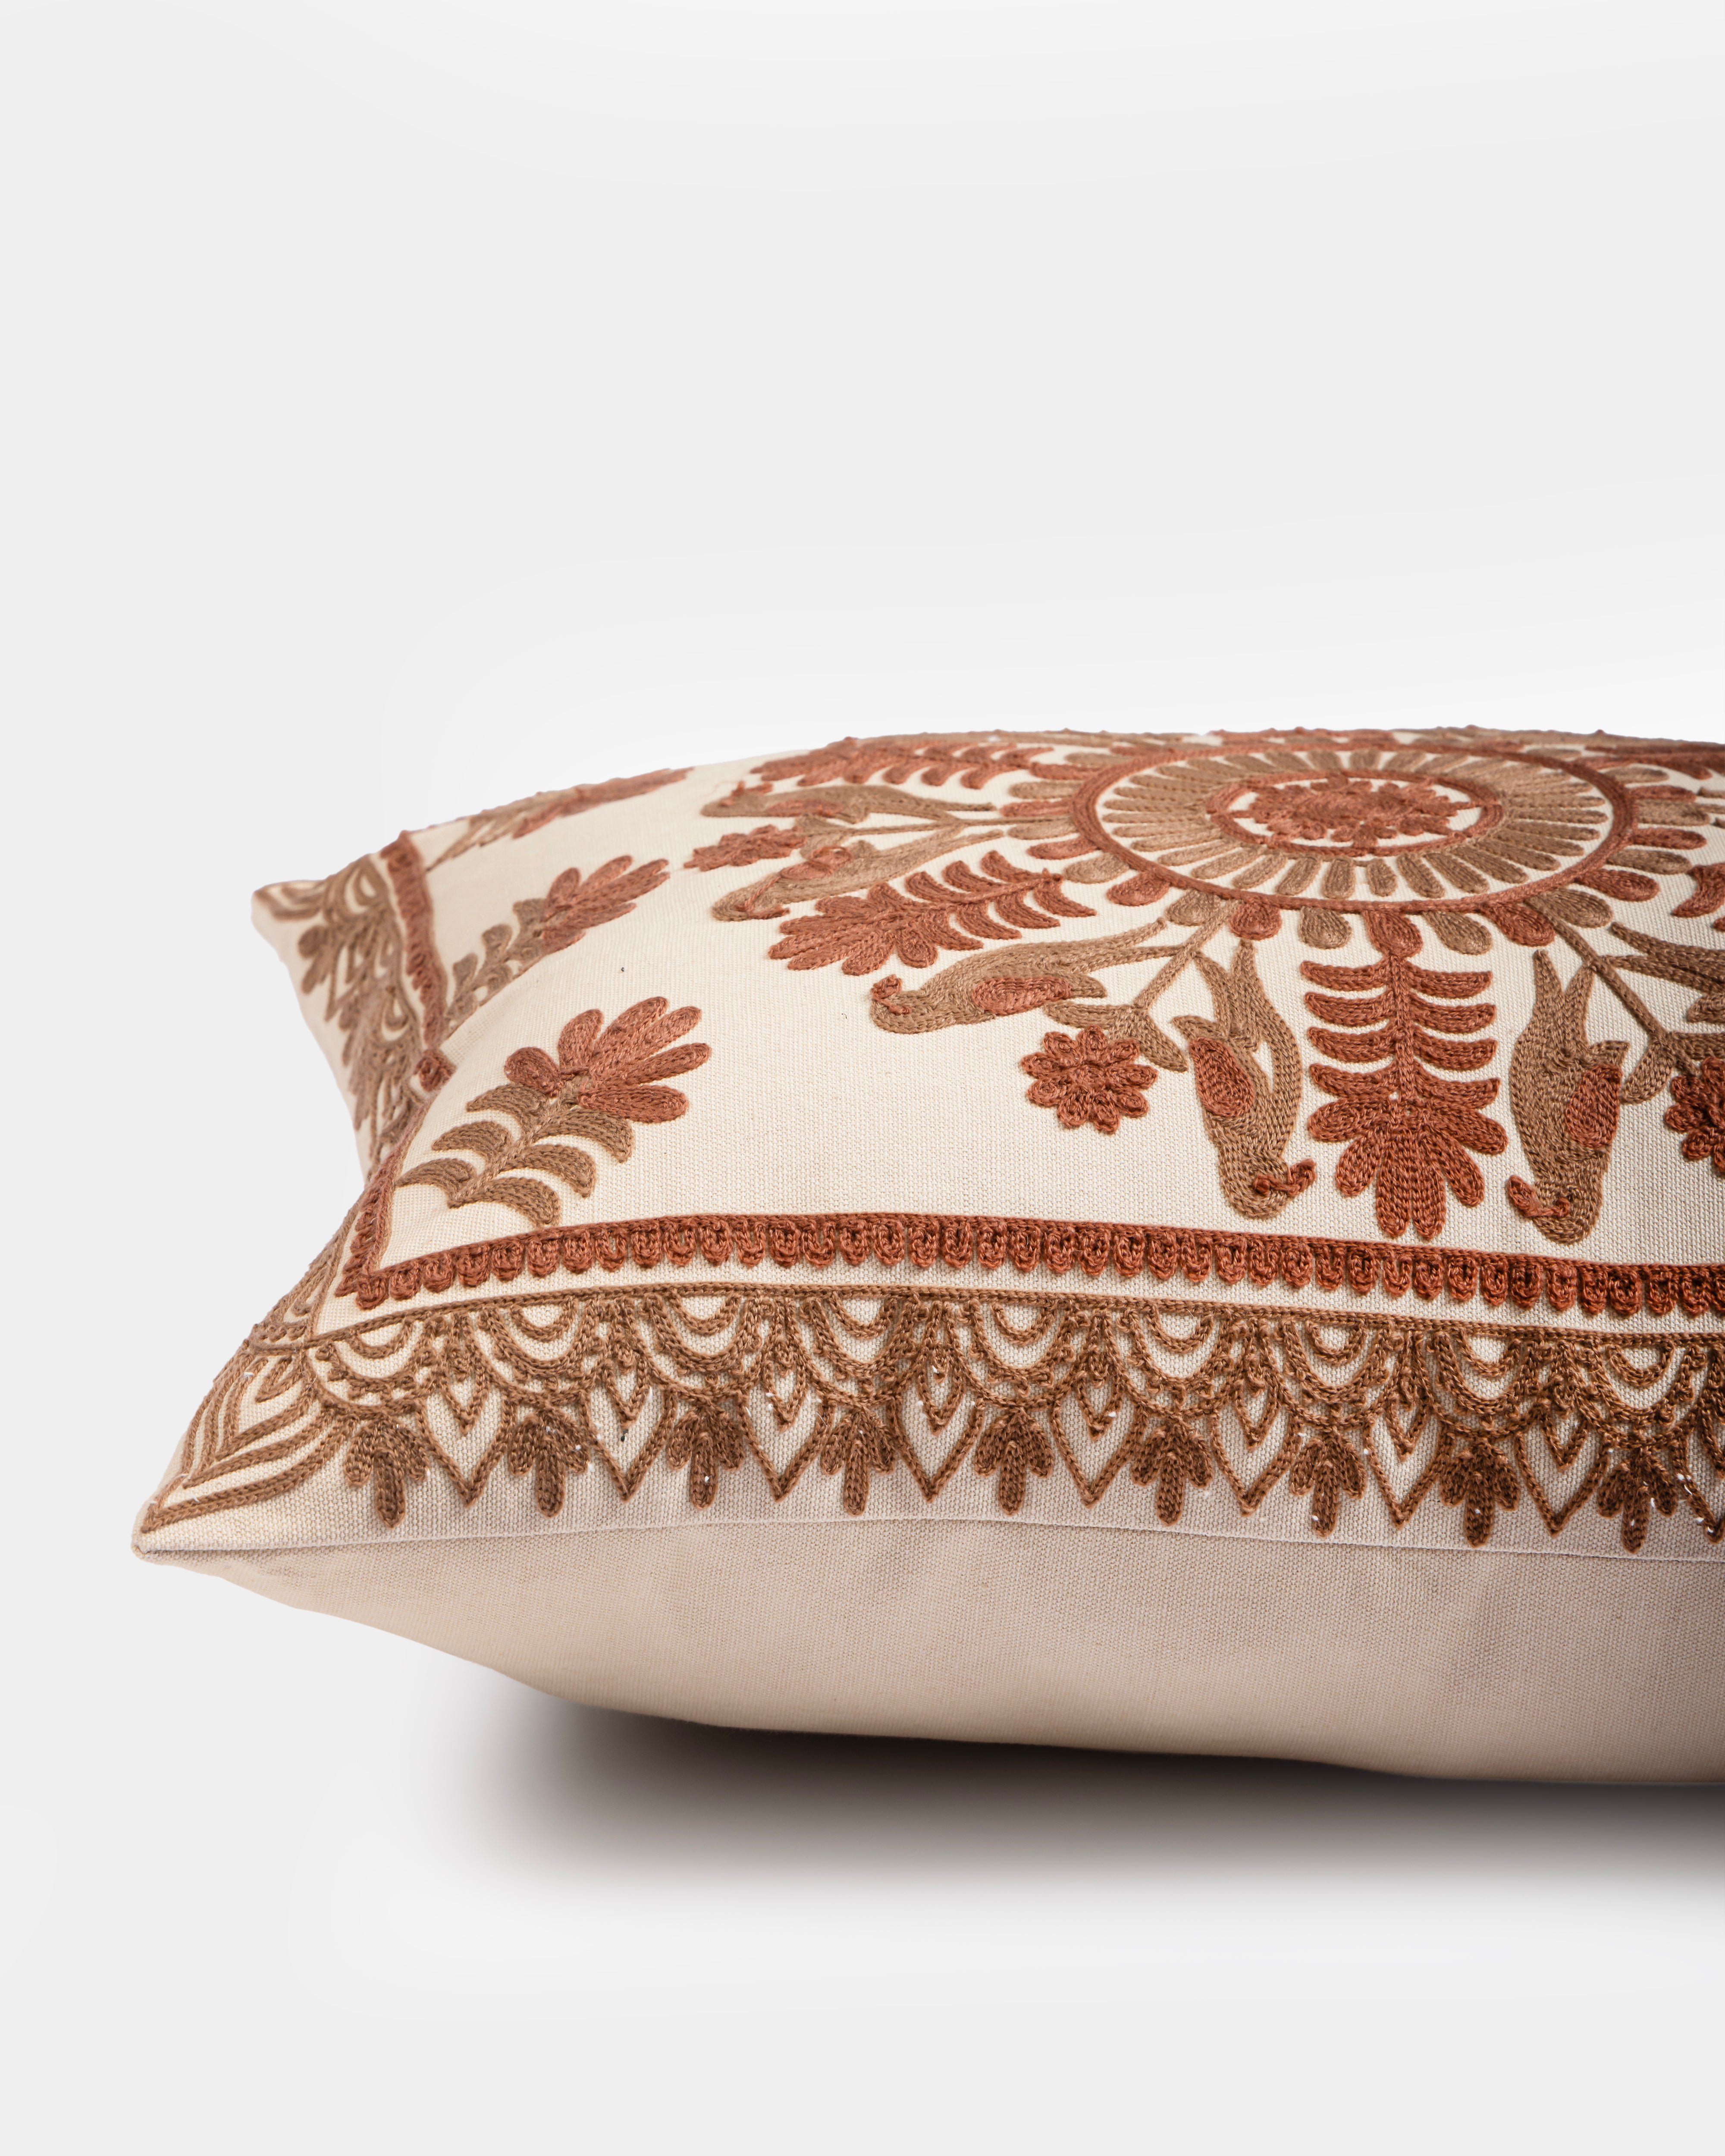 Suzani Pillow | Red  Pillow Cover Fauna 16x20" | Made in Jaipur